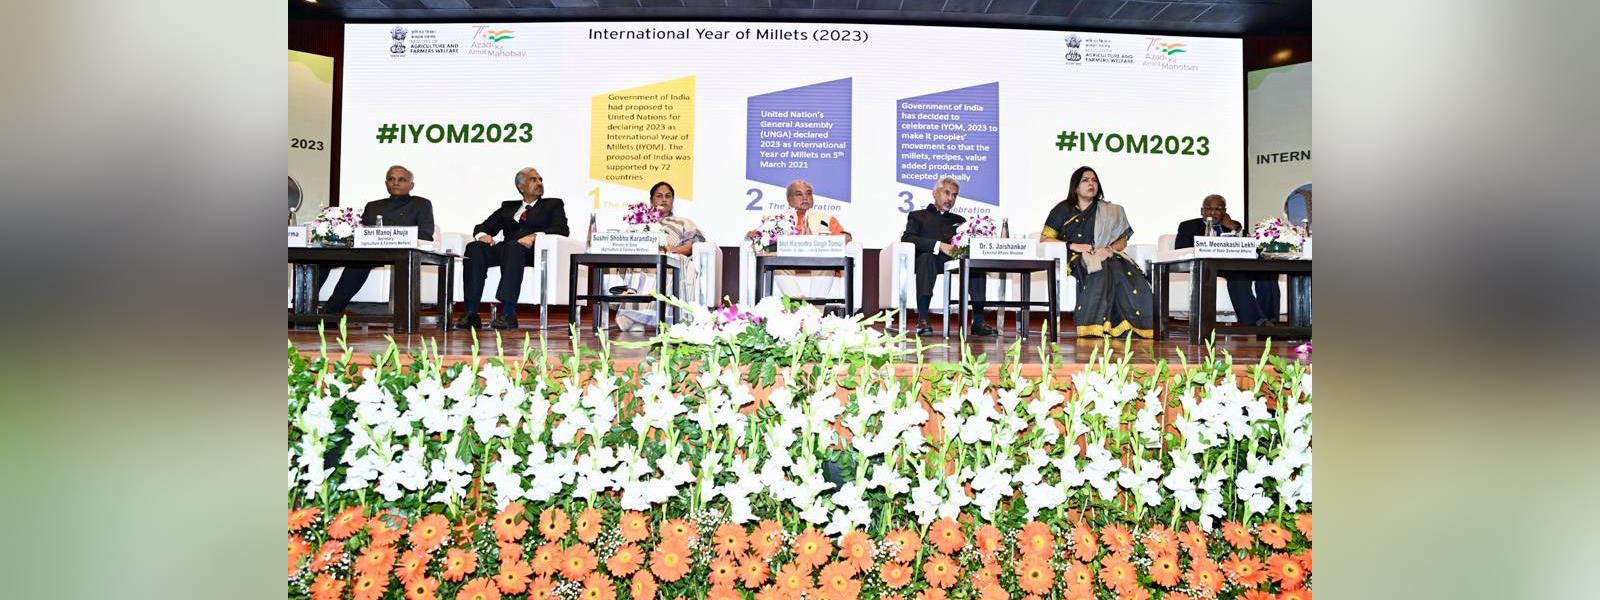 External Affairs Minister, Dr. S. Jaishankar and the Minister of Agriculture, Shri Narendra Singh Tomar at the pre-launch celebration of International Year of Millets 2023.